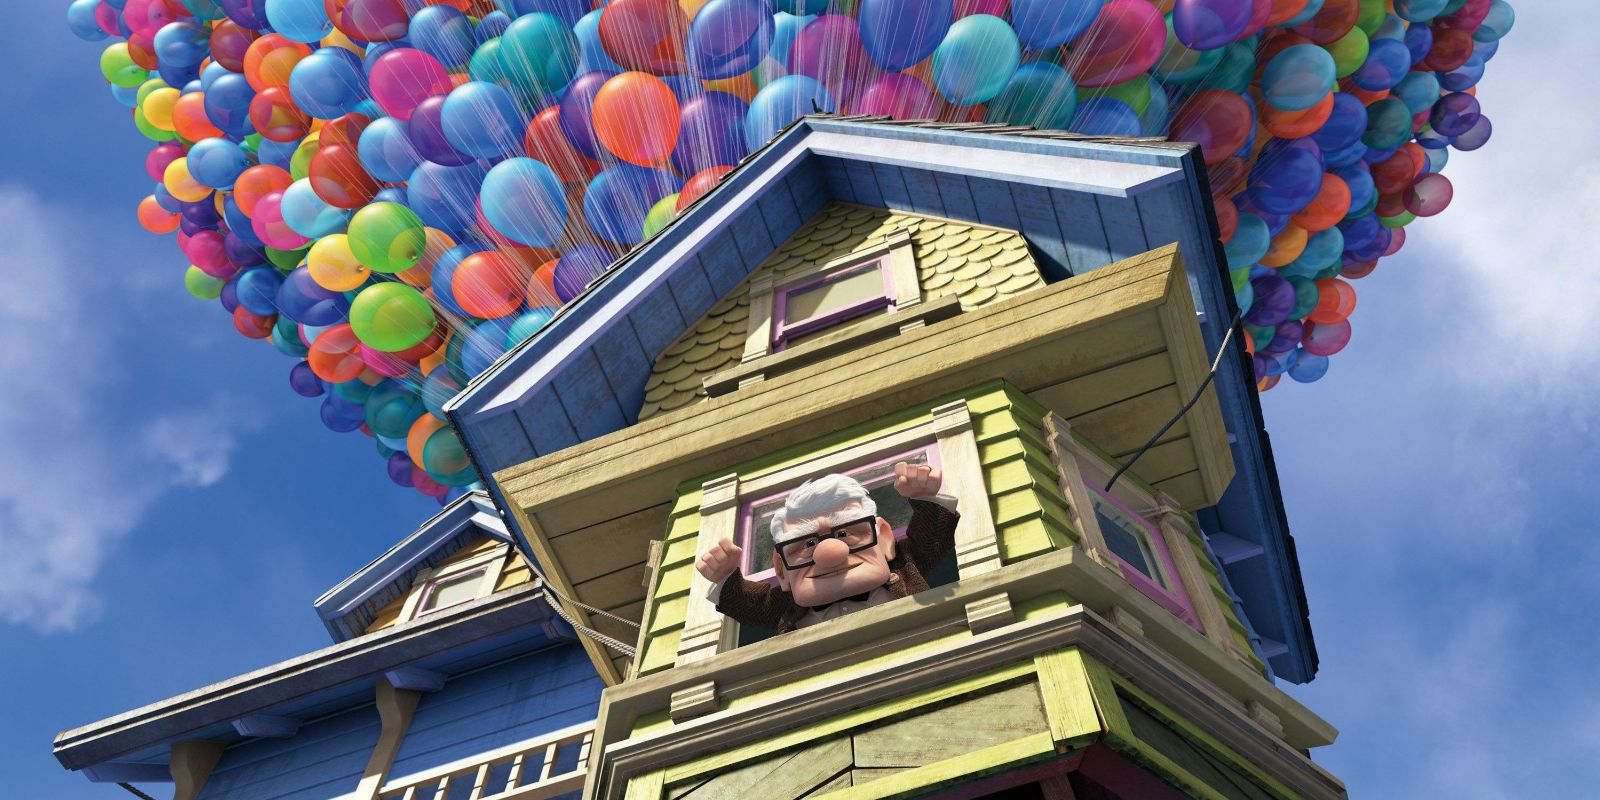 Carl's house lifts into the air in Pixar's Up